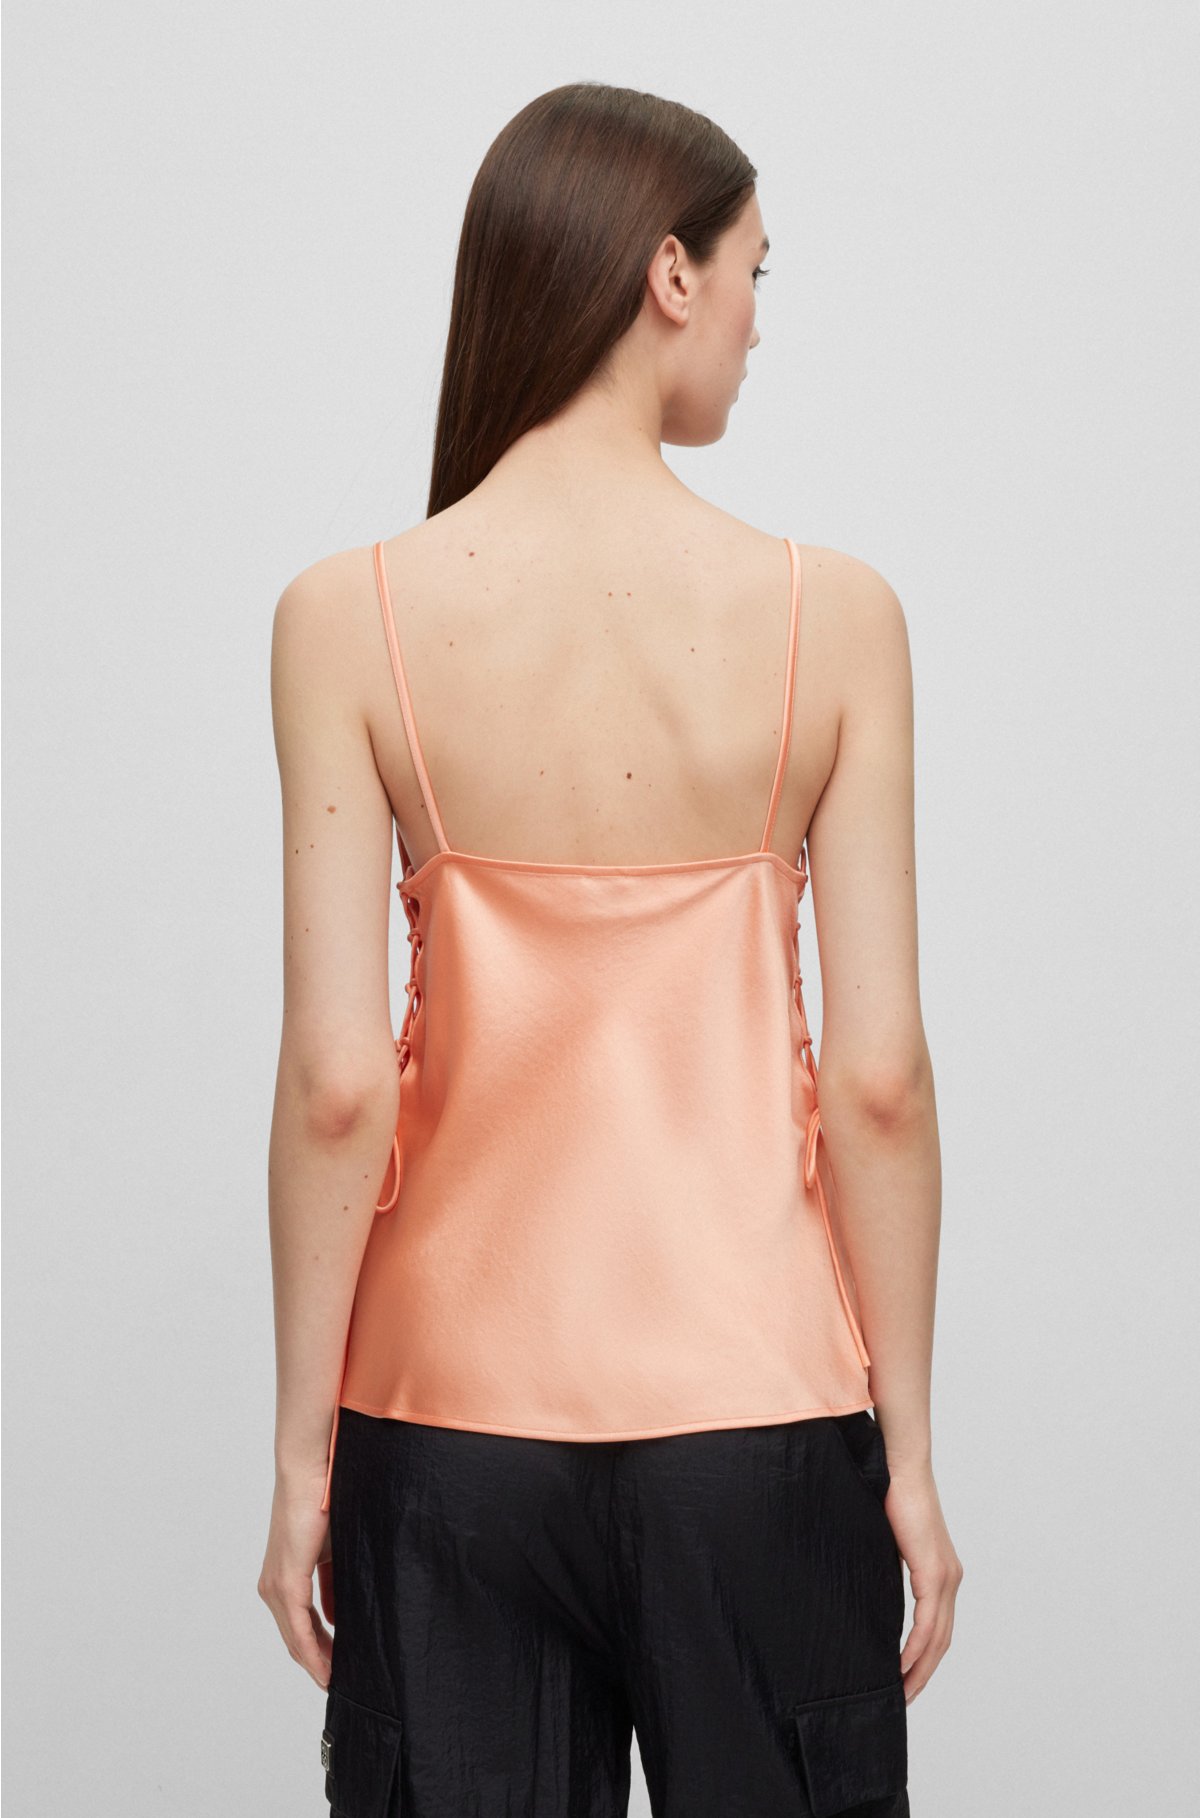 Ladies Satin & Lace Camisole Top With Adjustable Straps by Marlon